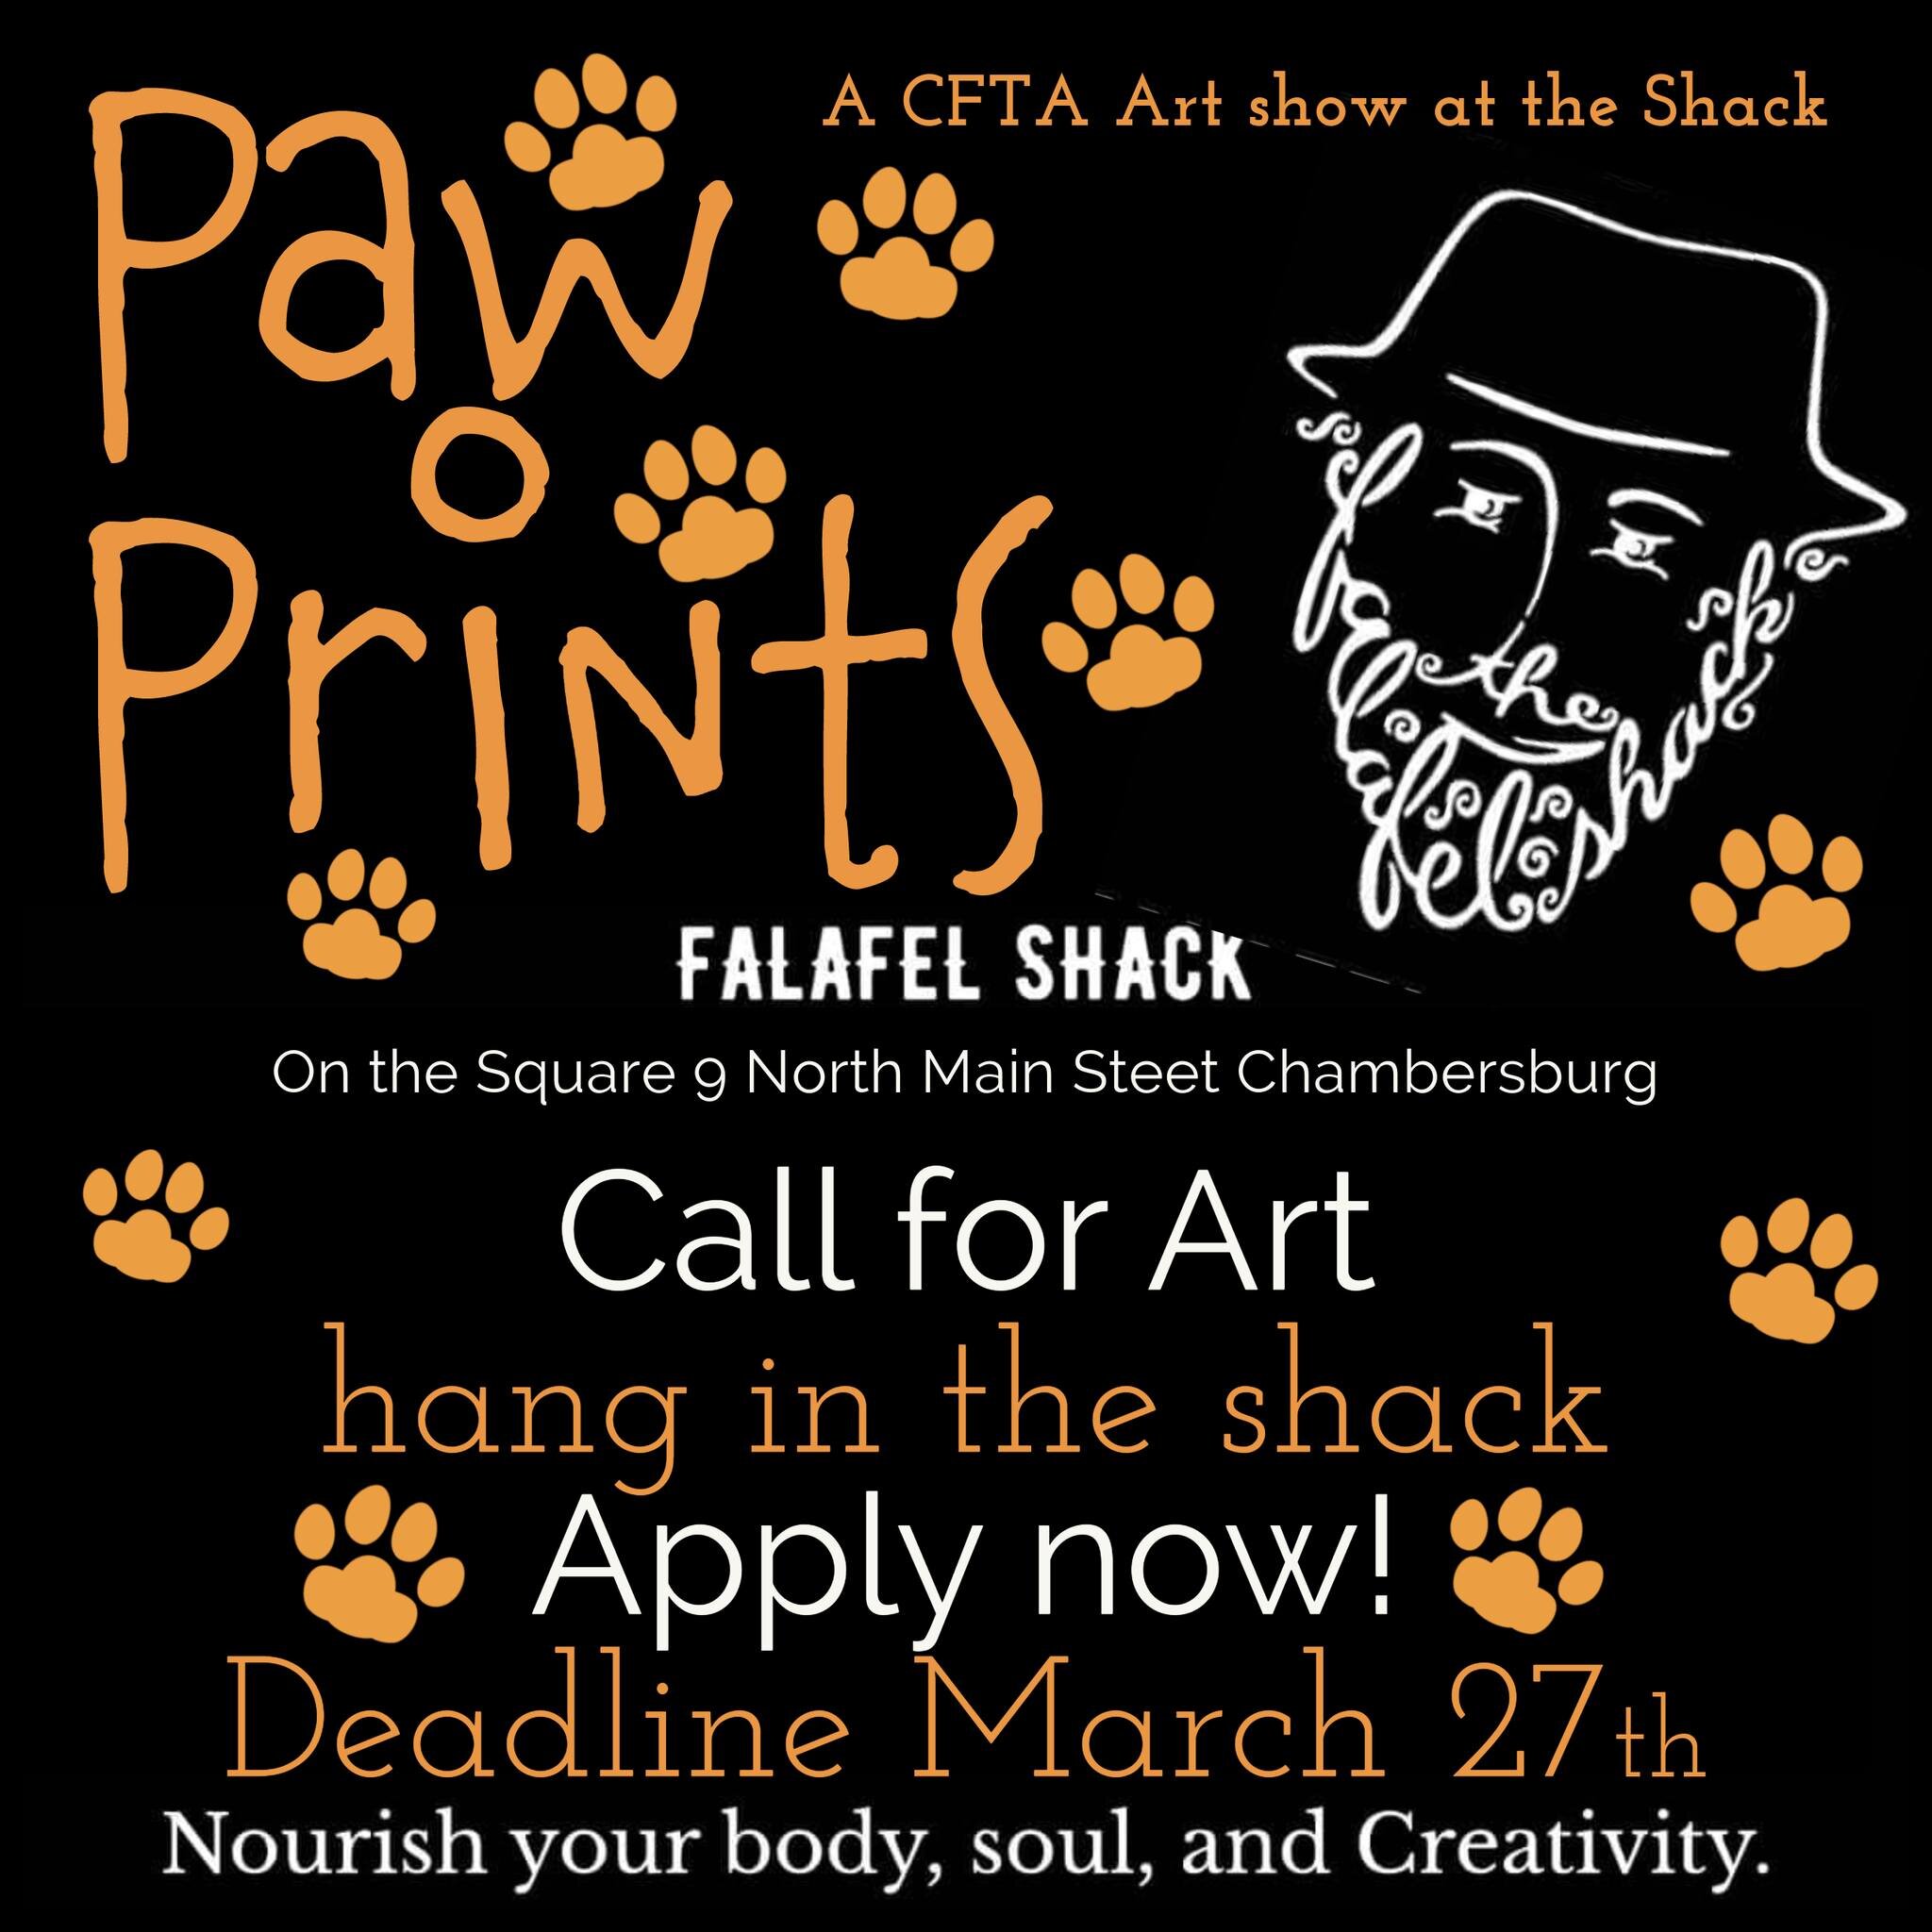 Hang in the Shack!
Any size, any medium, animals
Hang in the shack for 3 months April-May-June
Deadline March 27th
More information at https://www.councilforthearts.net/seasonal-falafel-shack-call-for-art